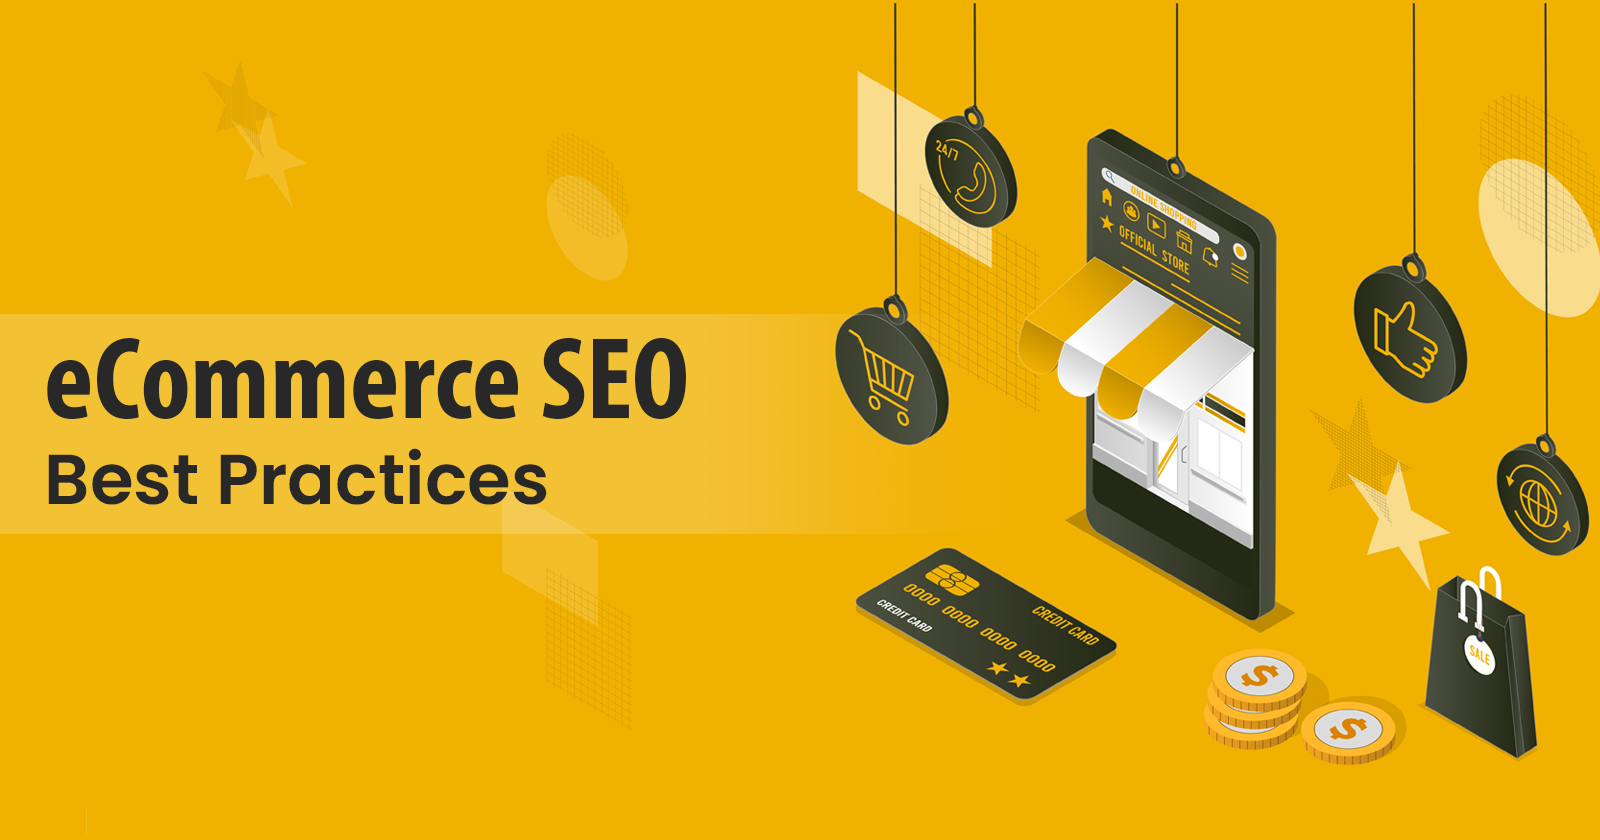 3 eCommerce SEO Best Practices for Your Online Business